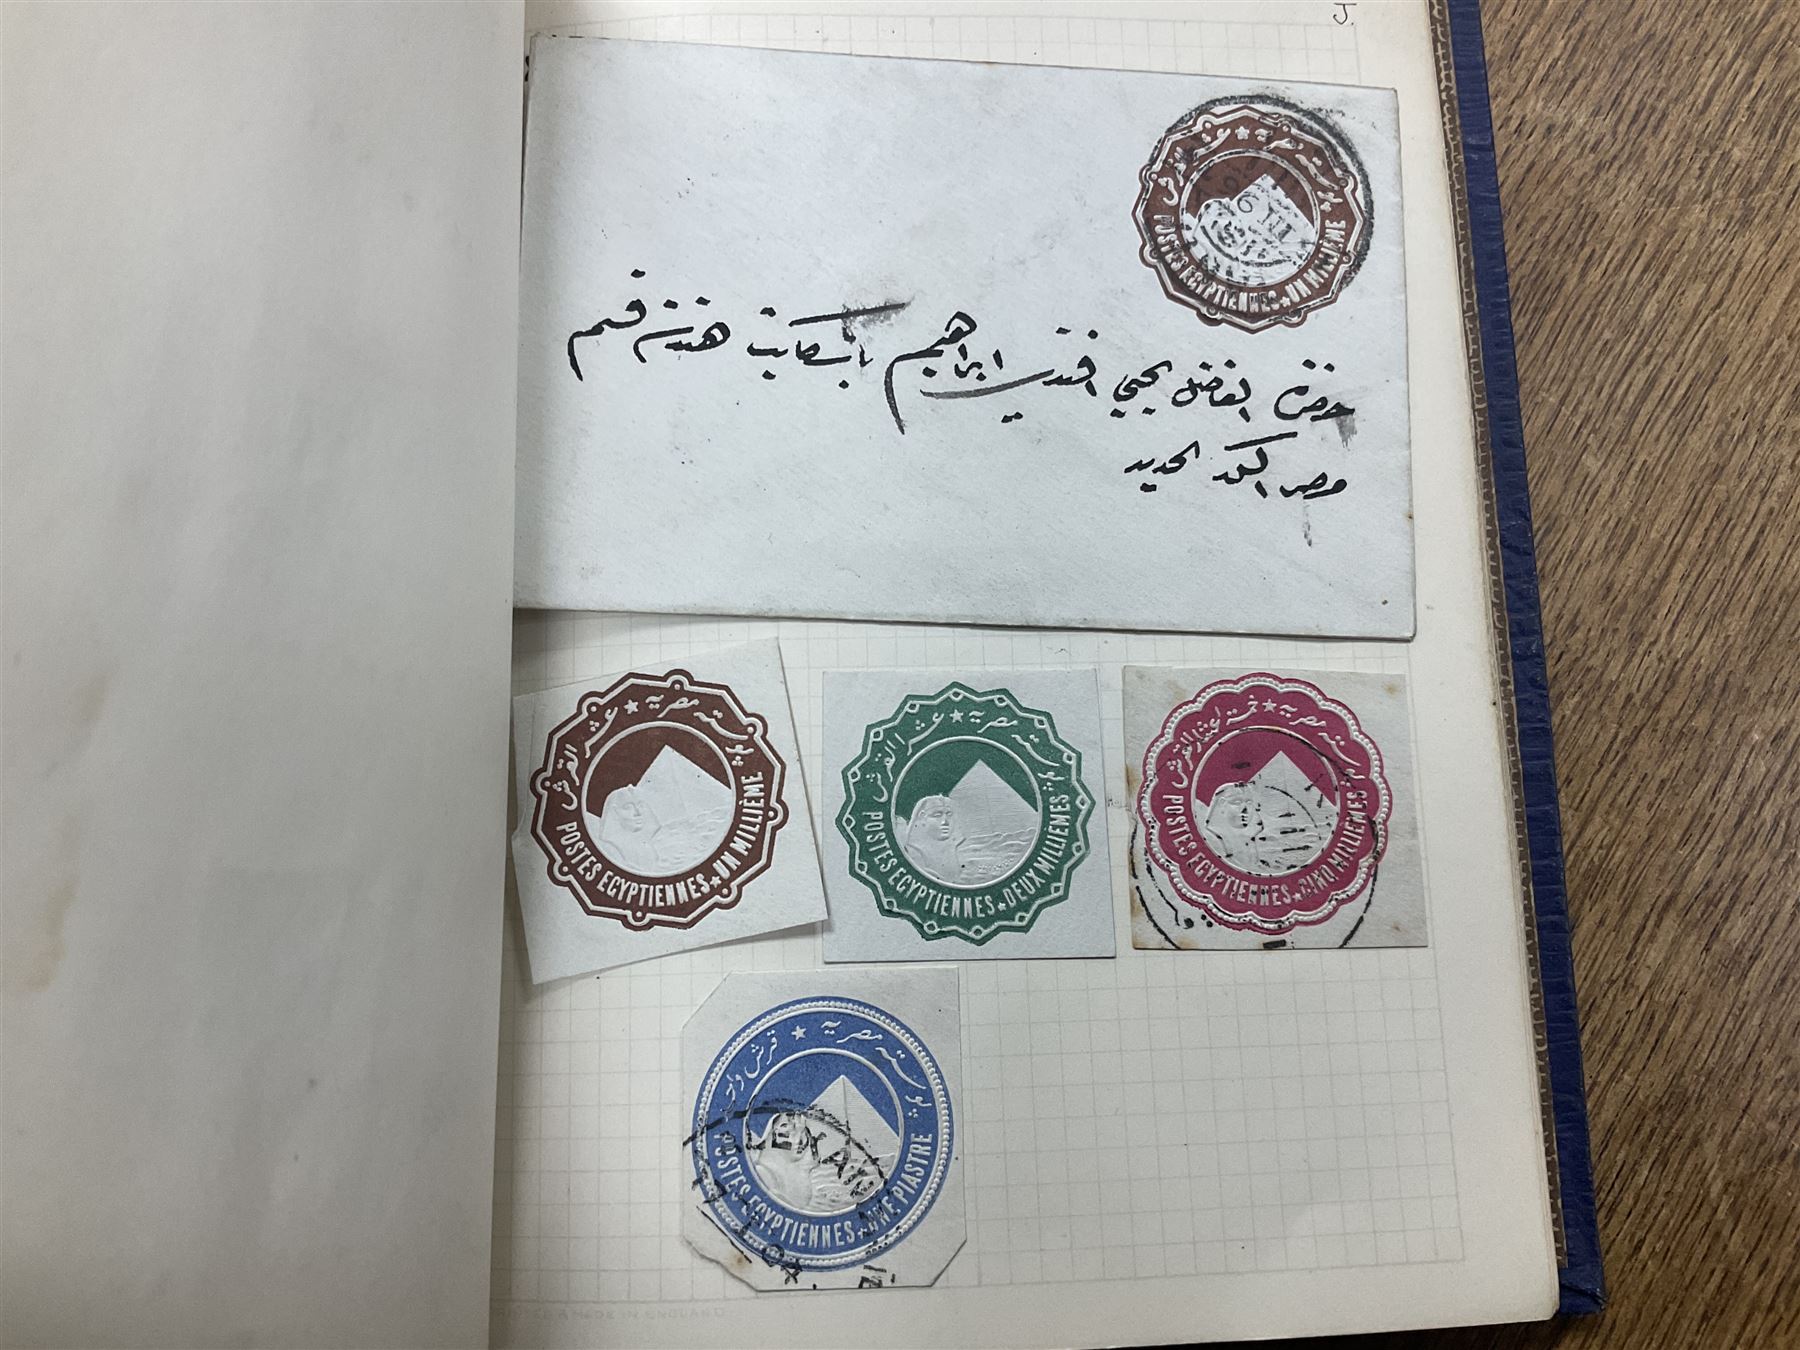 Egypt 1866 and later stamps - Image 624 of 761